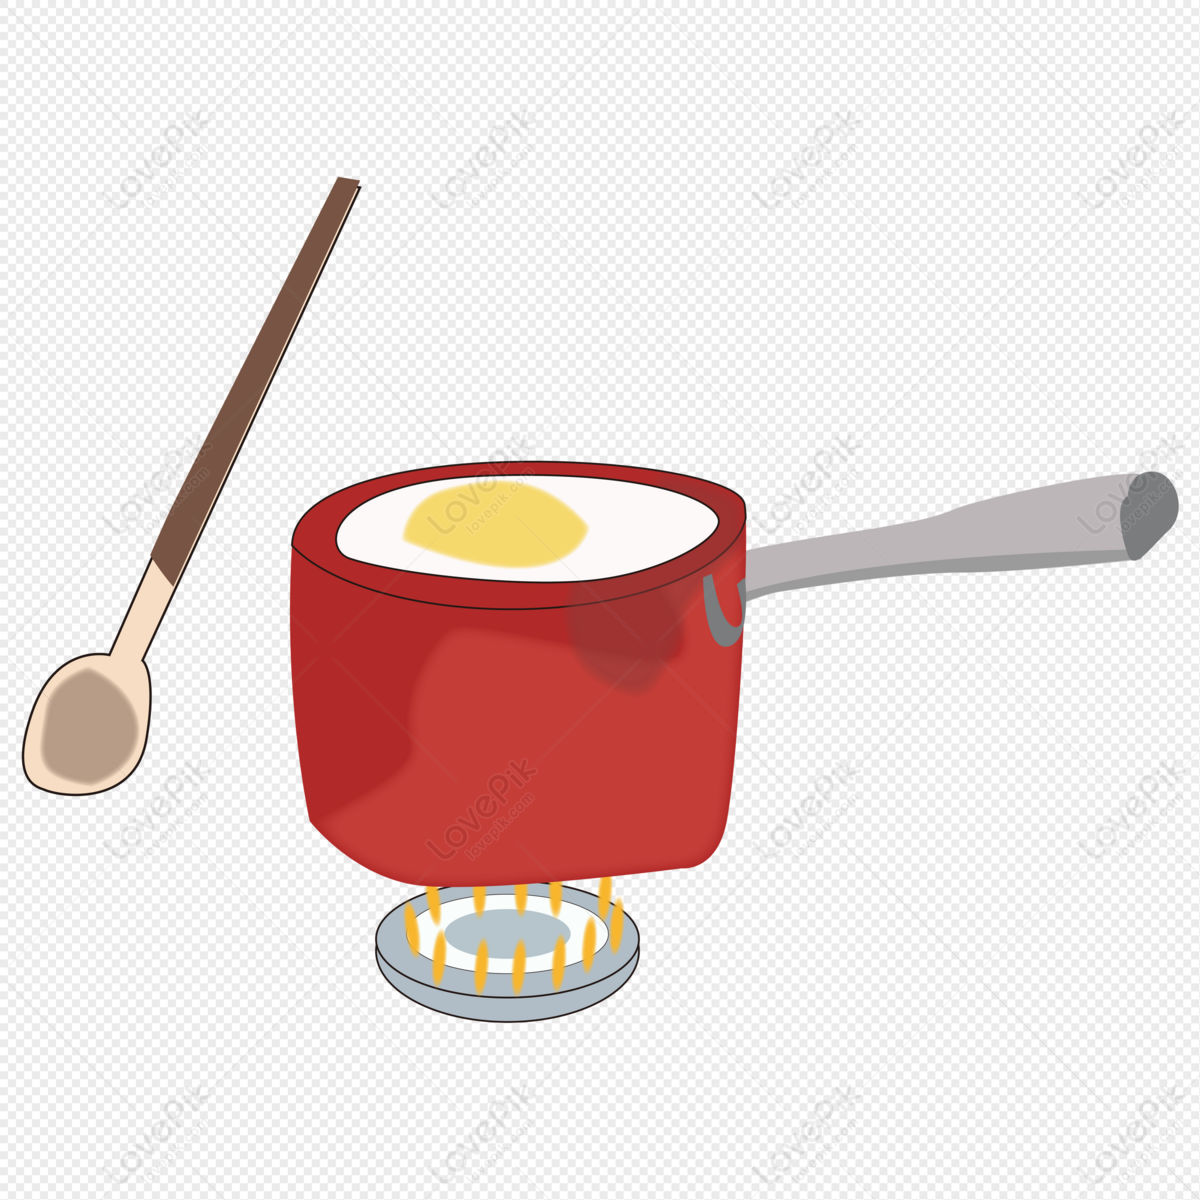 Cartoon Cooking Red Soup Pot Wooden Spoon PNG Picture And Clipart Image For  Free Download - Lovepik | 401241815